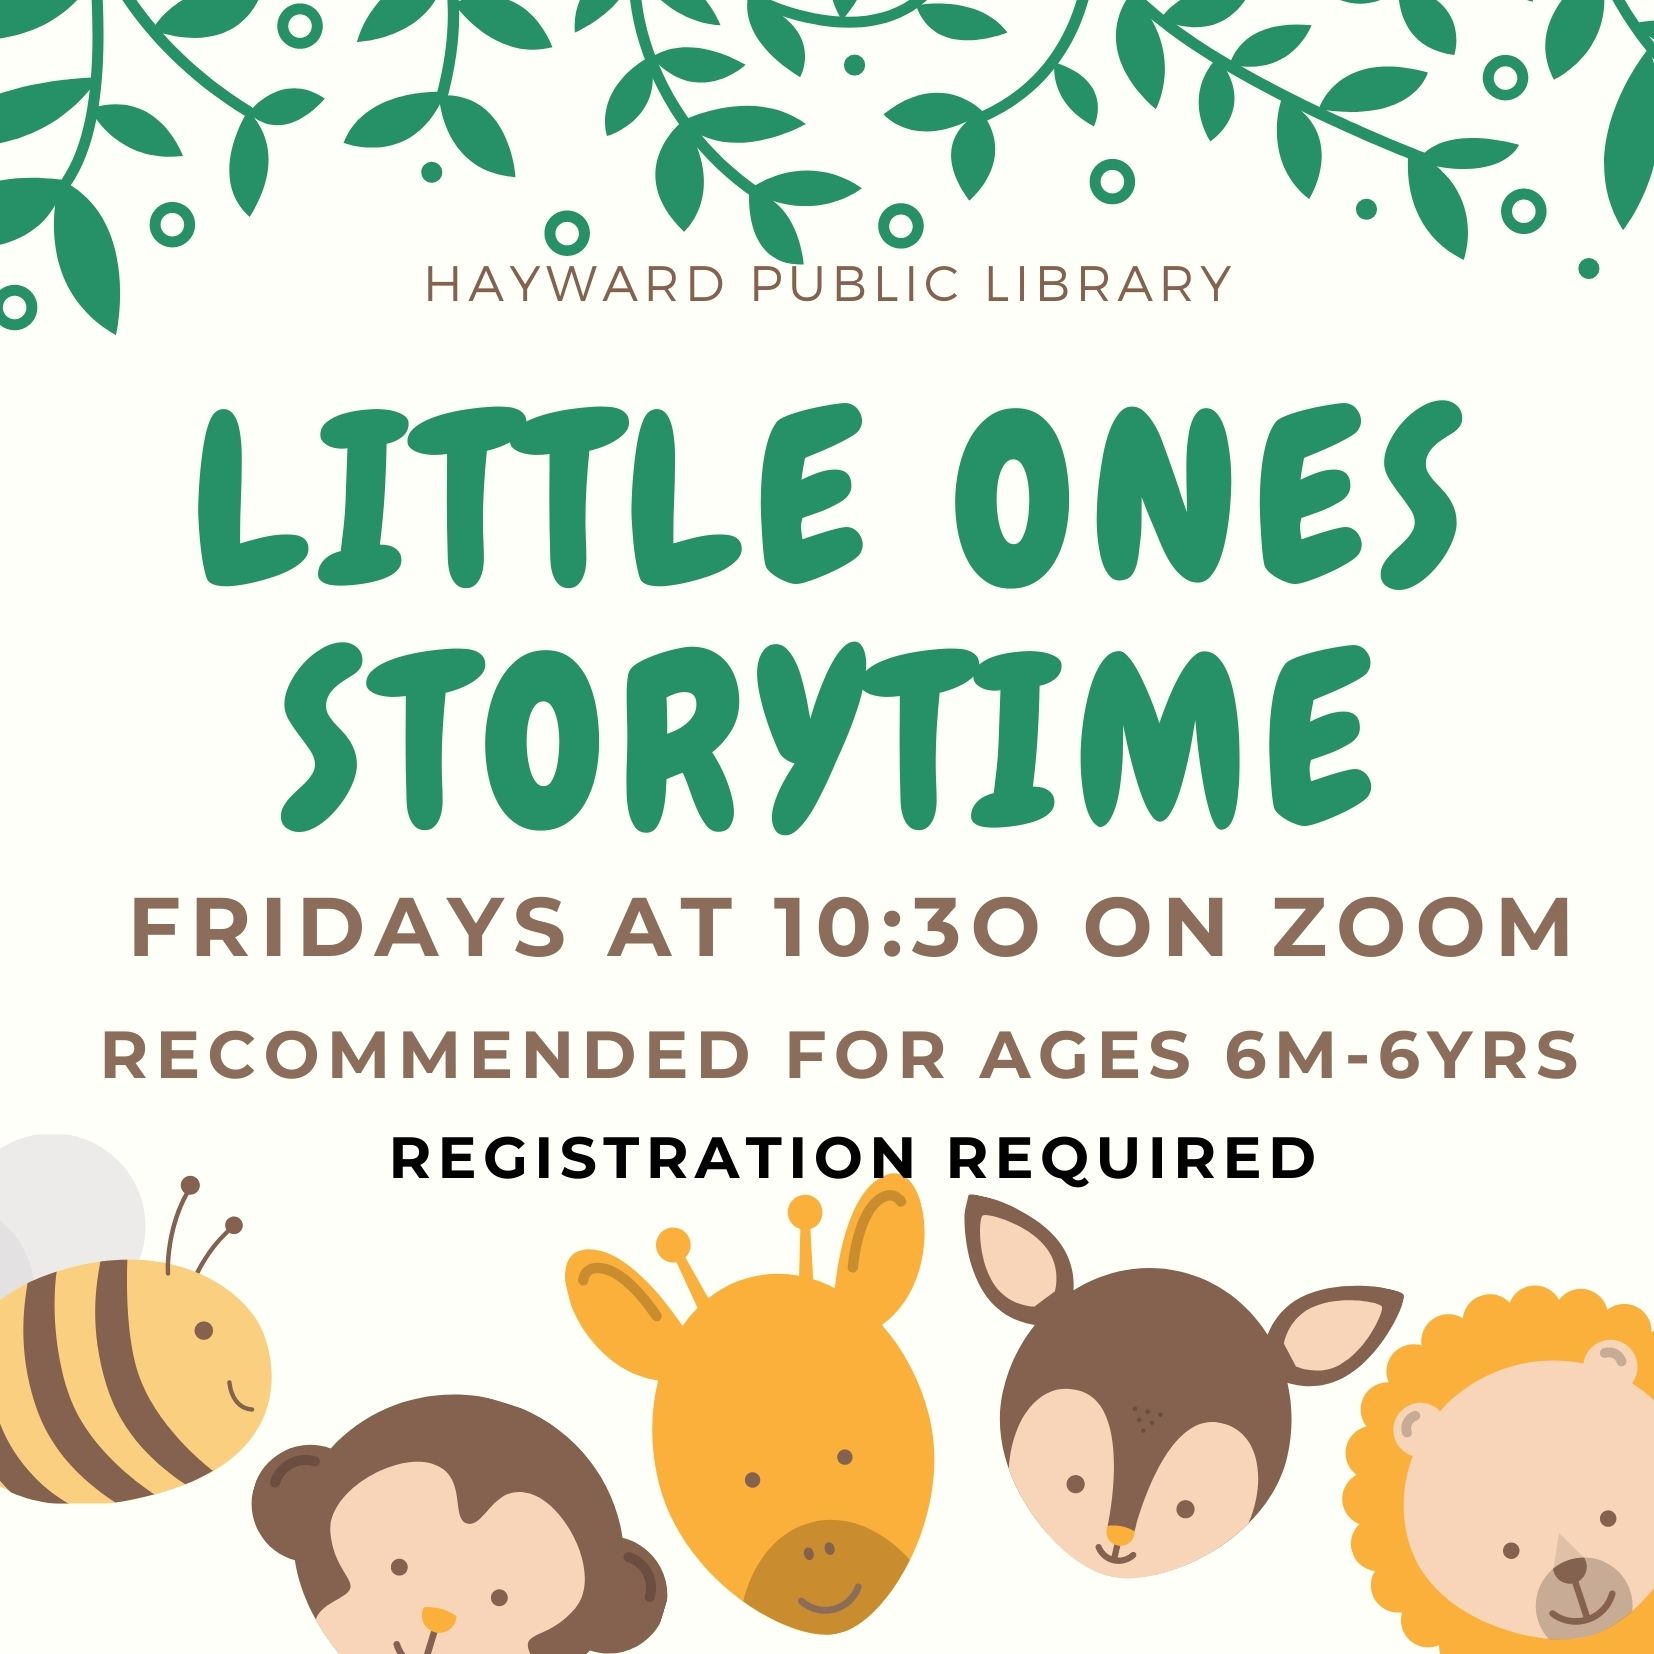 Flyer with green leaves and baby animals, Text reads: Little Ones Storytime, Fridays at 10:30 on Zoom, recommended for ages 6m-6yrs,  registration required